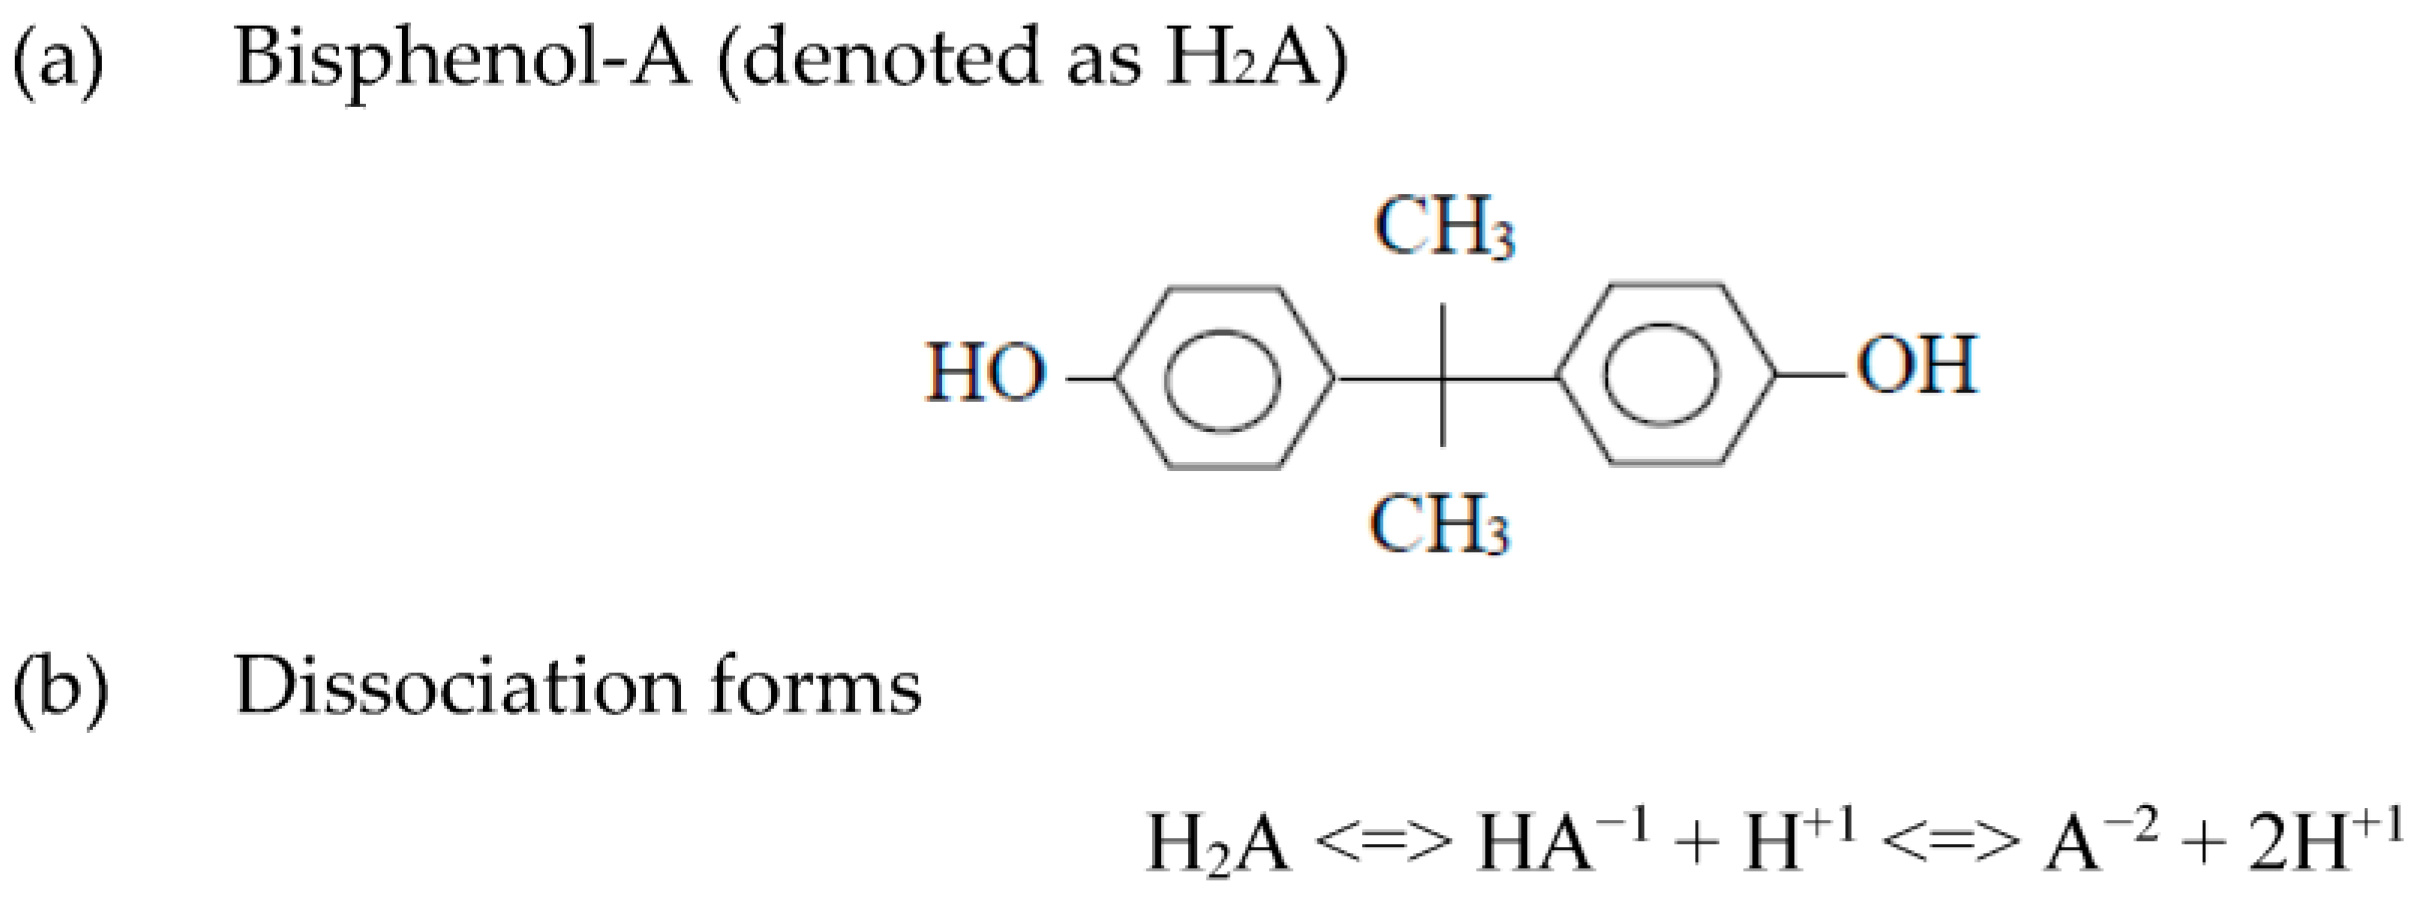 Bisphenol A - Chemicals In Our Life - ECHA